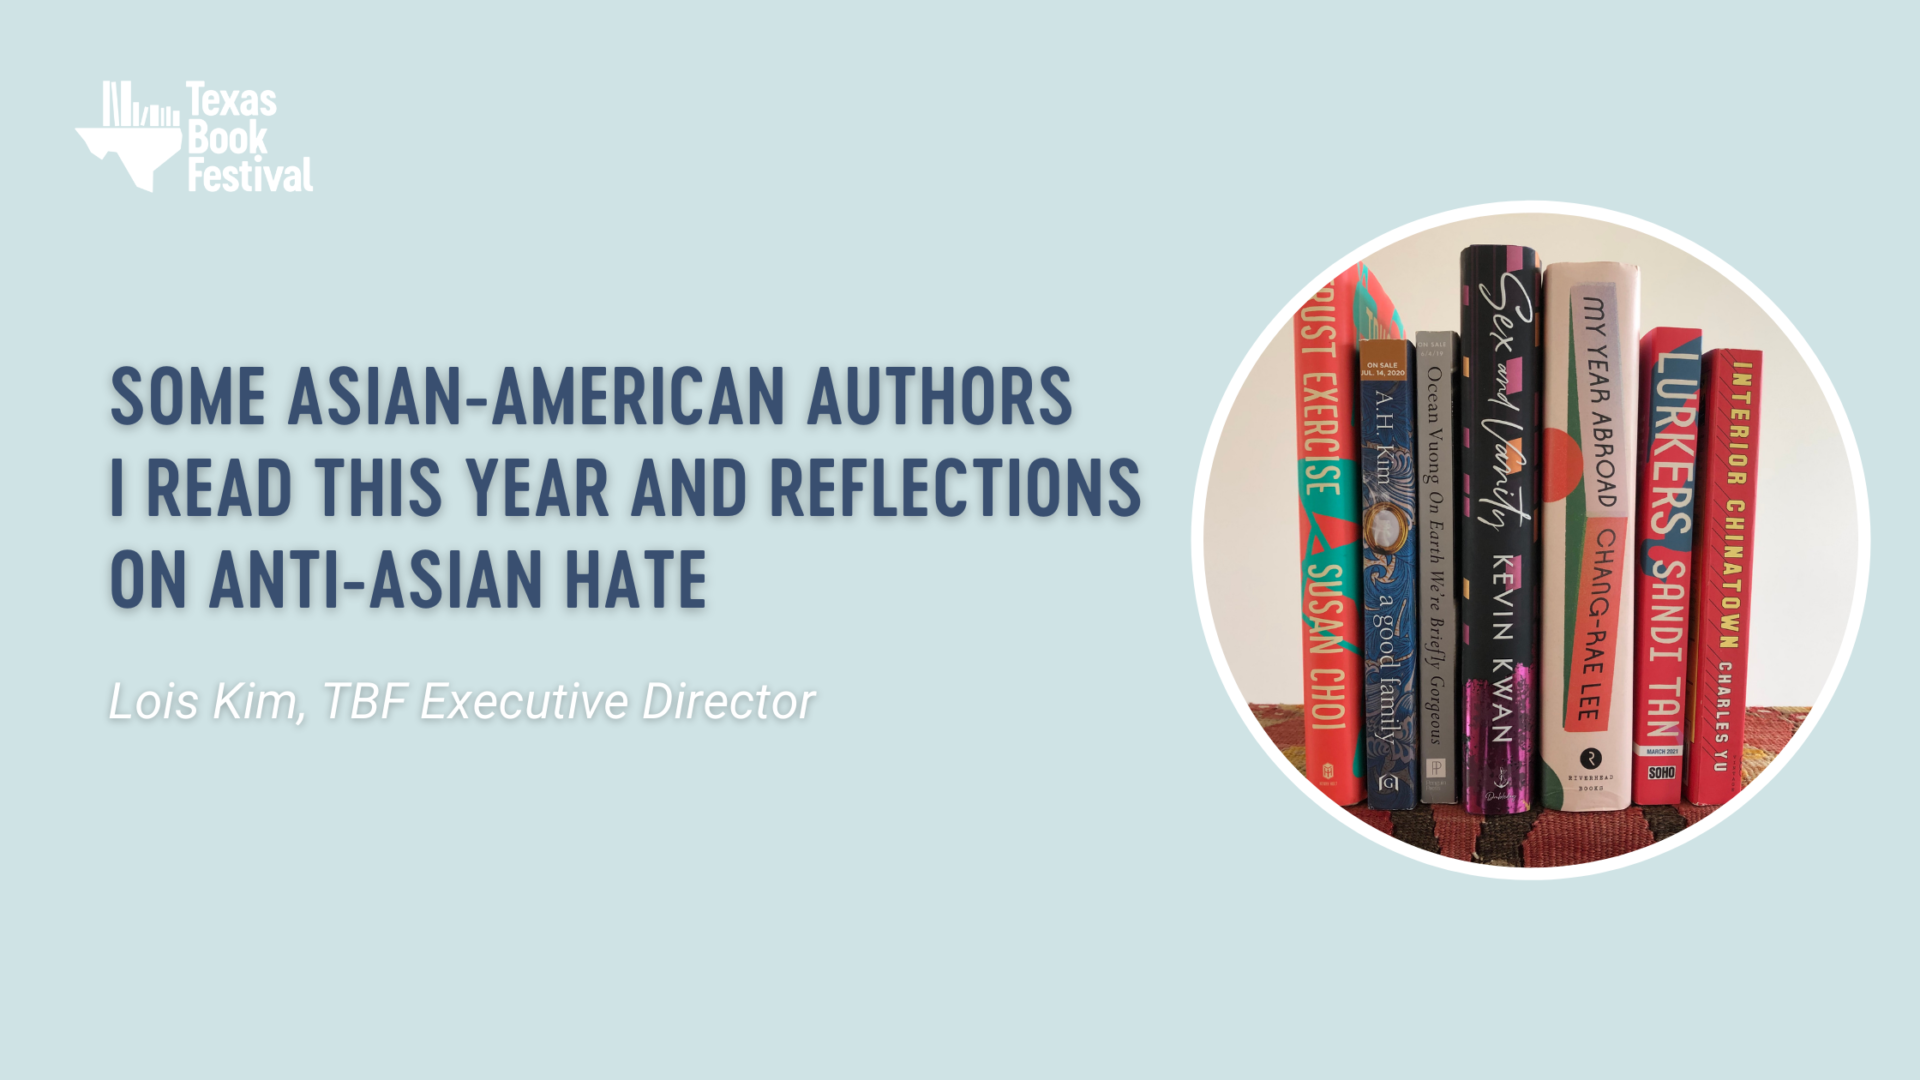 Recommended Reads by Asian-American Authors